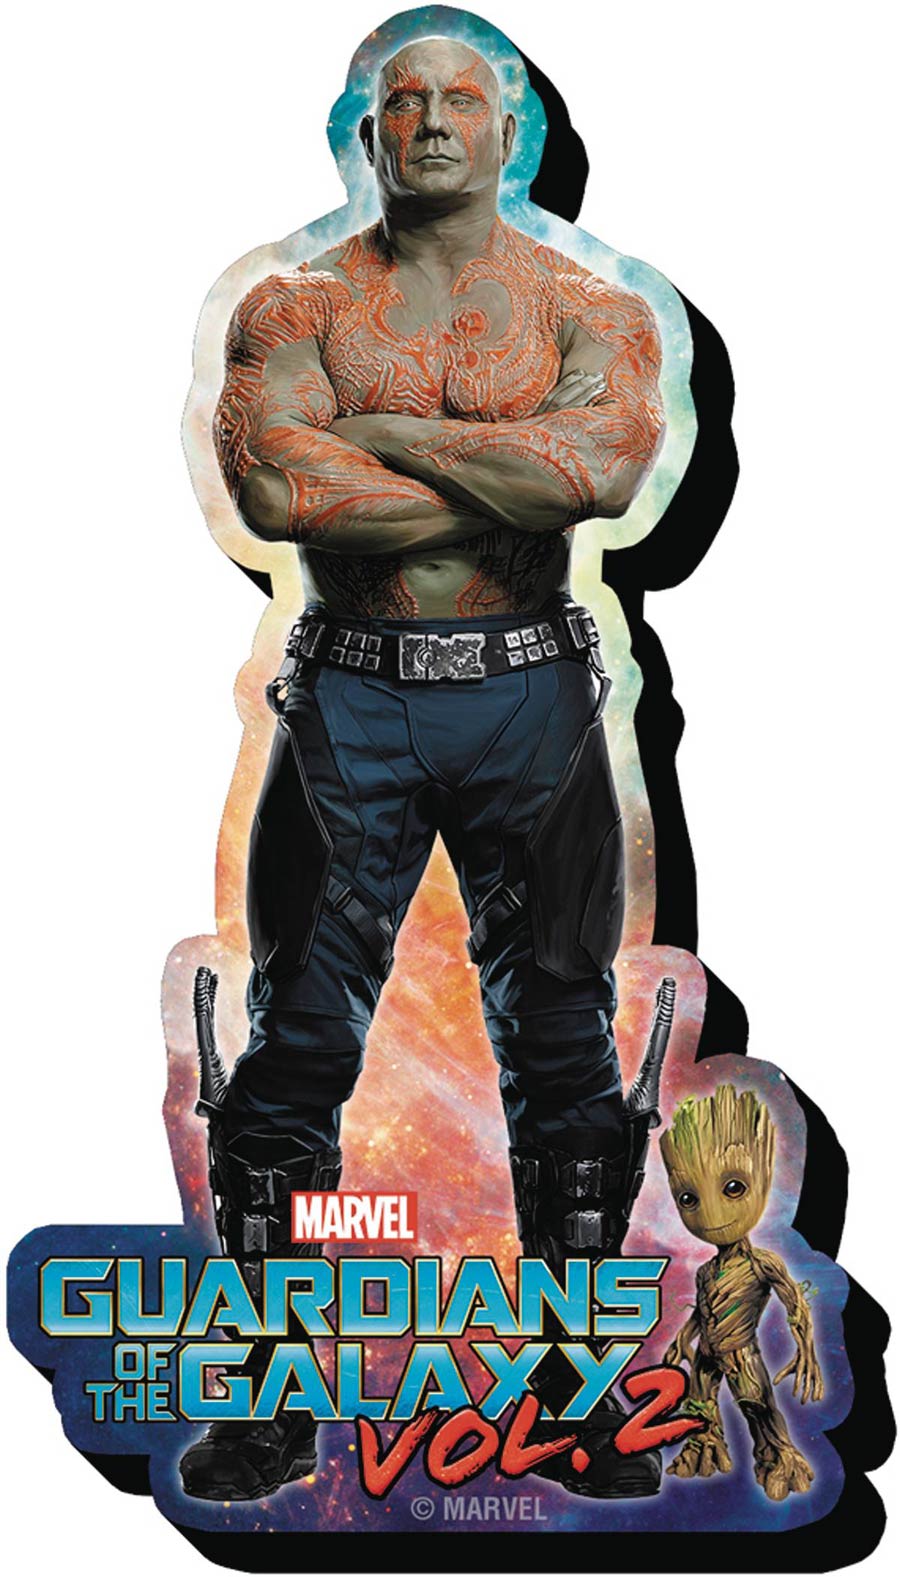 Guardians Of The Galaxy Vol 2 Chunky Magnet - Drax